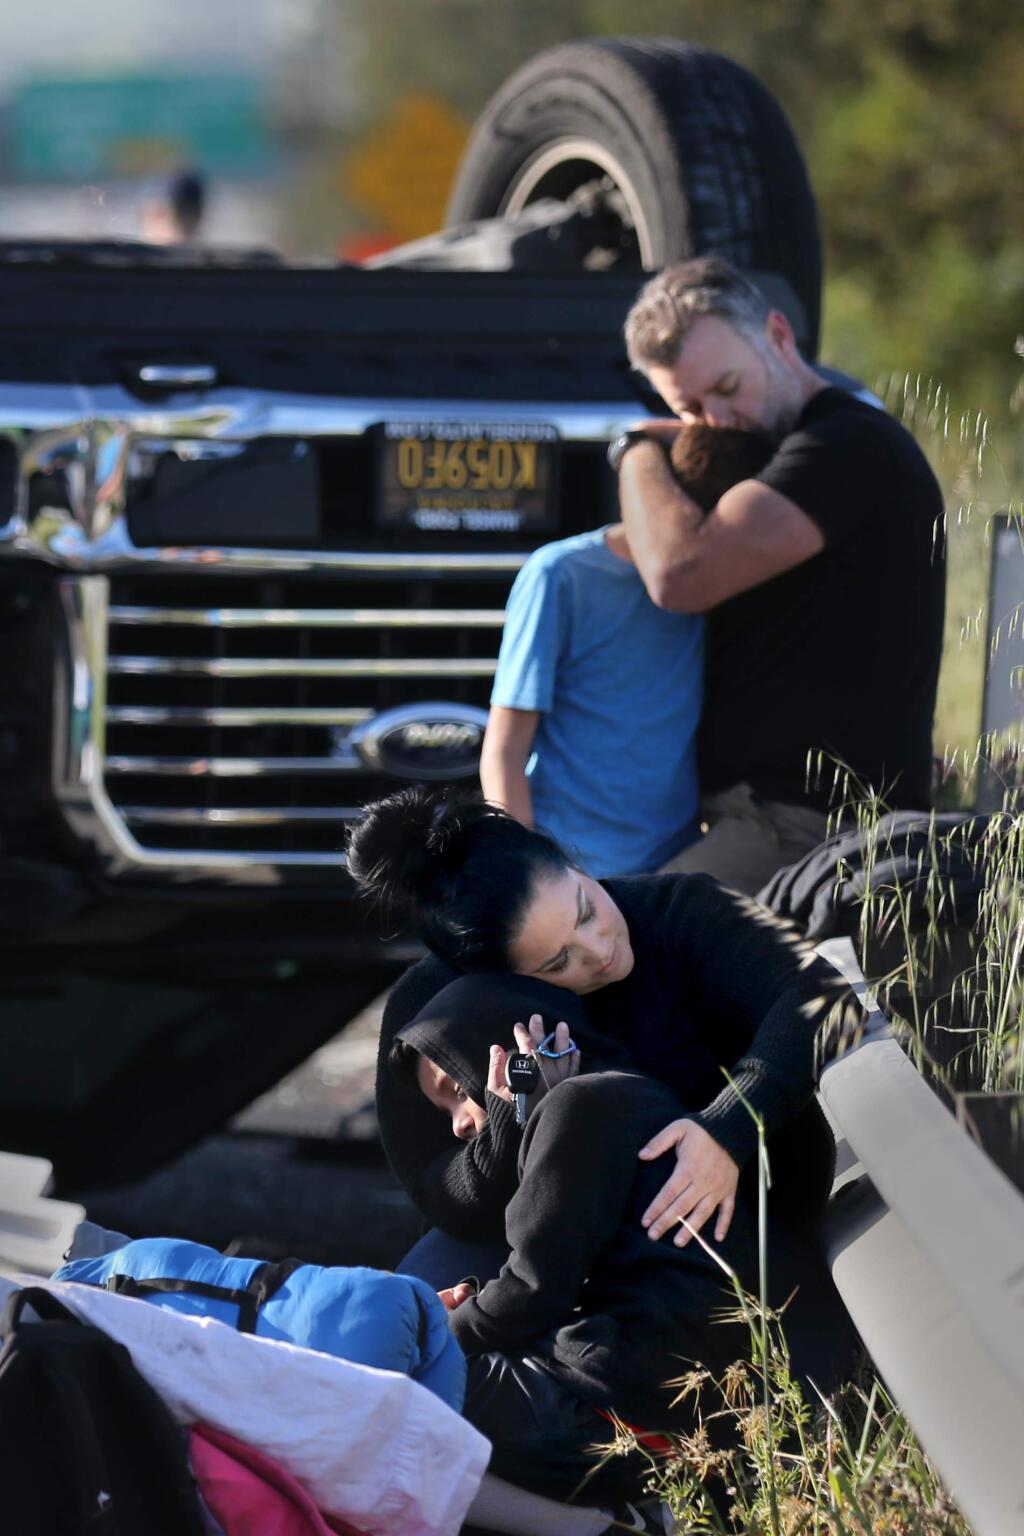 Michelle Piscitello comforts her son Rylan, 9, after he was involved in a multi-vehicle accident en route to a 4th grade overnight field trip. The accident occurred on southbound Highway 101 just north of Lakeville Highway in Petaluma on Thursday, April 25, 2019. (BETH SCHLANKER/ PD)